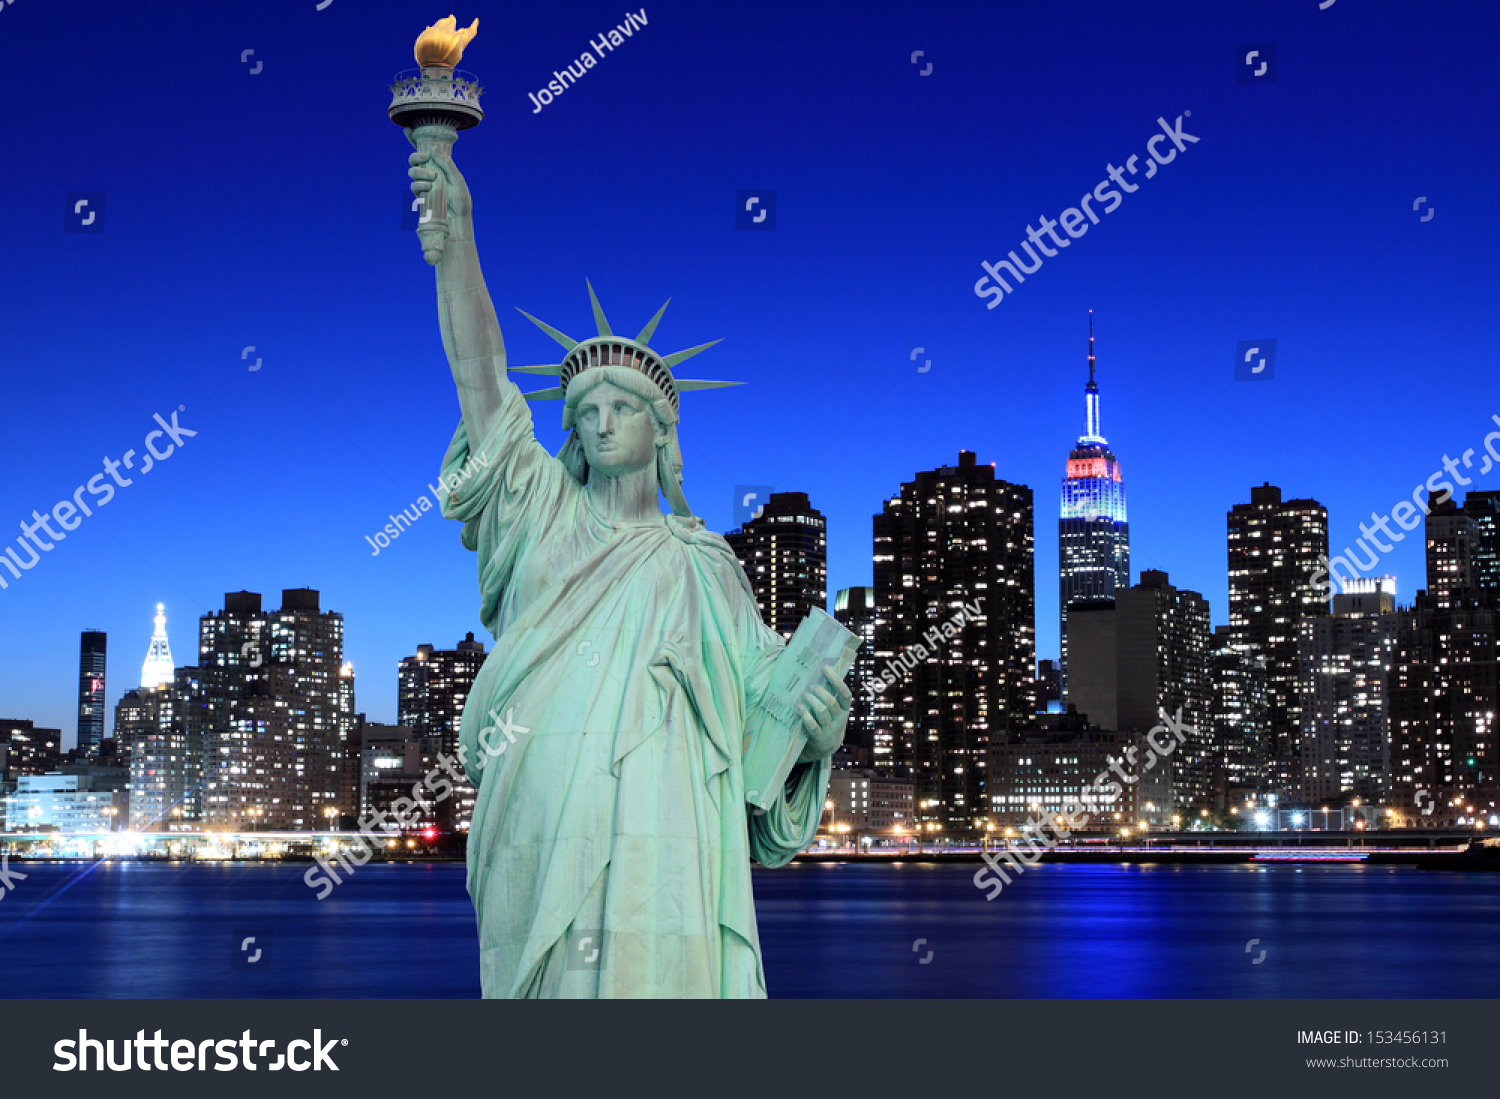 Midtown Manhattan Skyline and The Statue of Liberty at Night, New York City #153456131